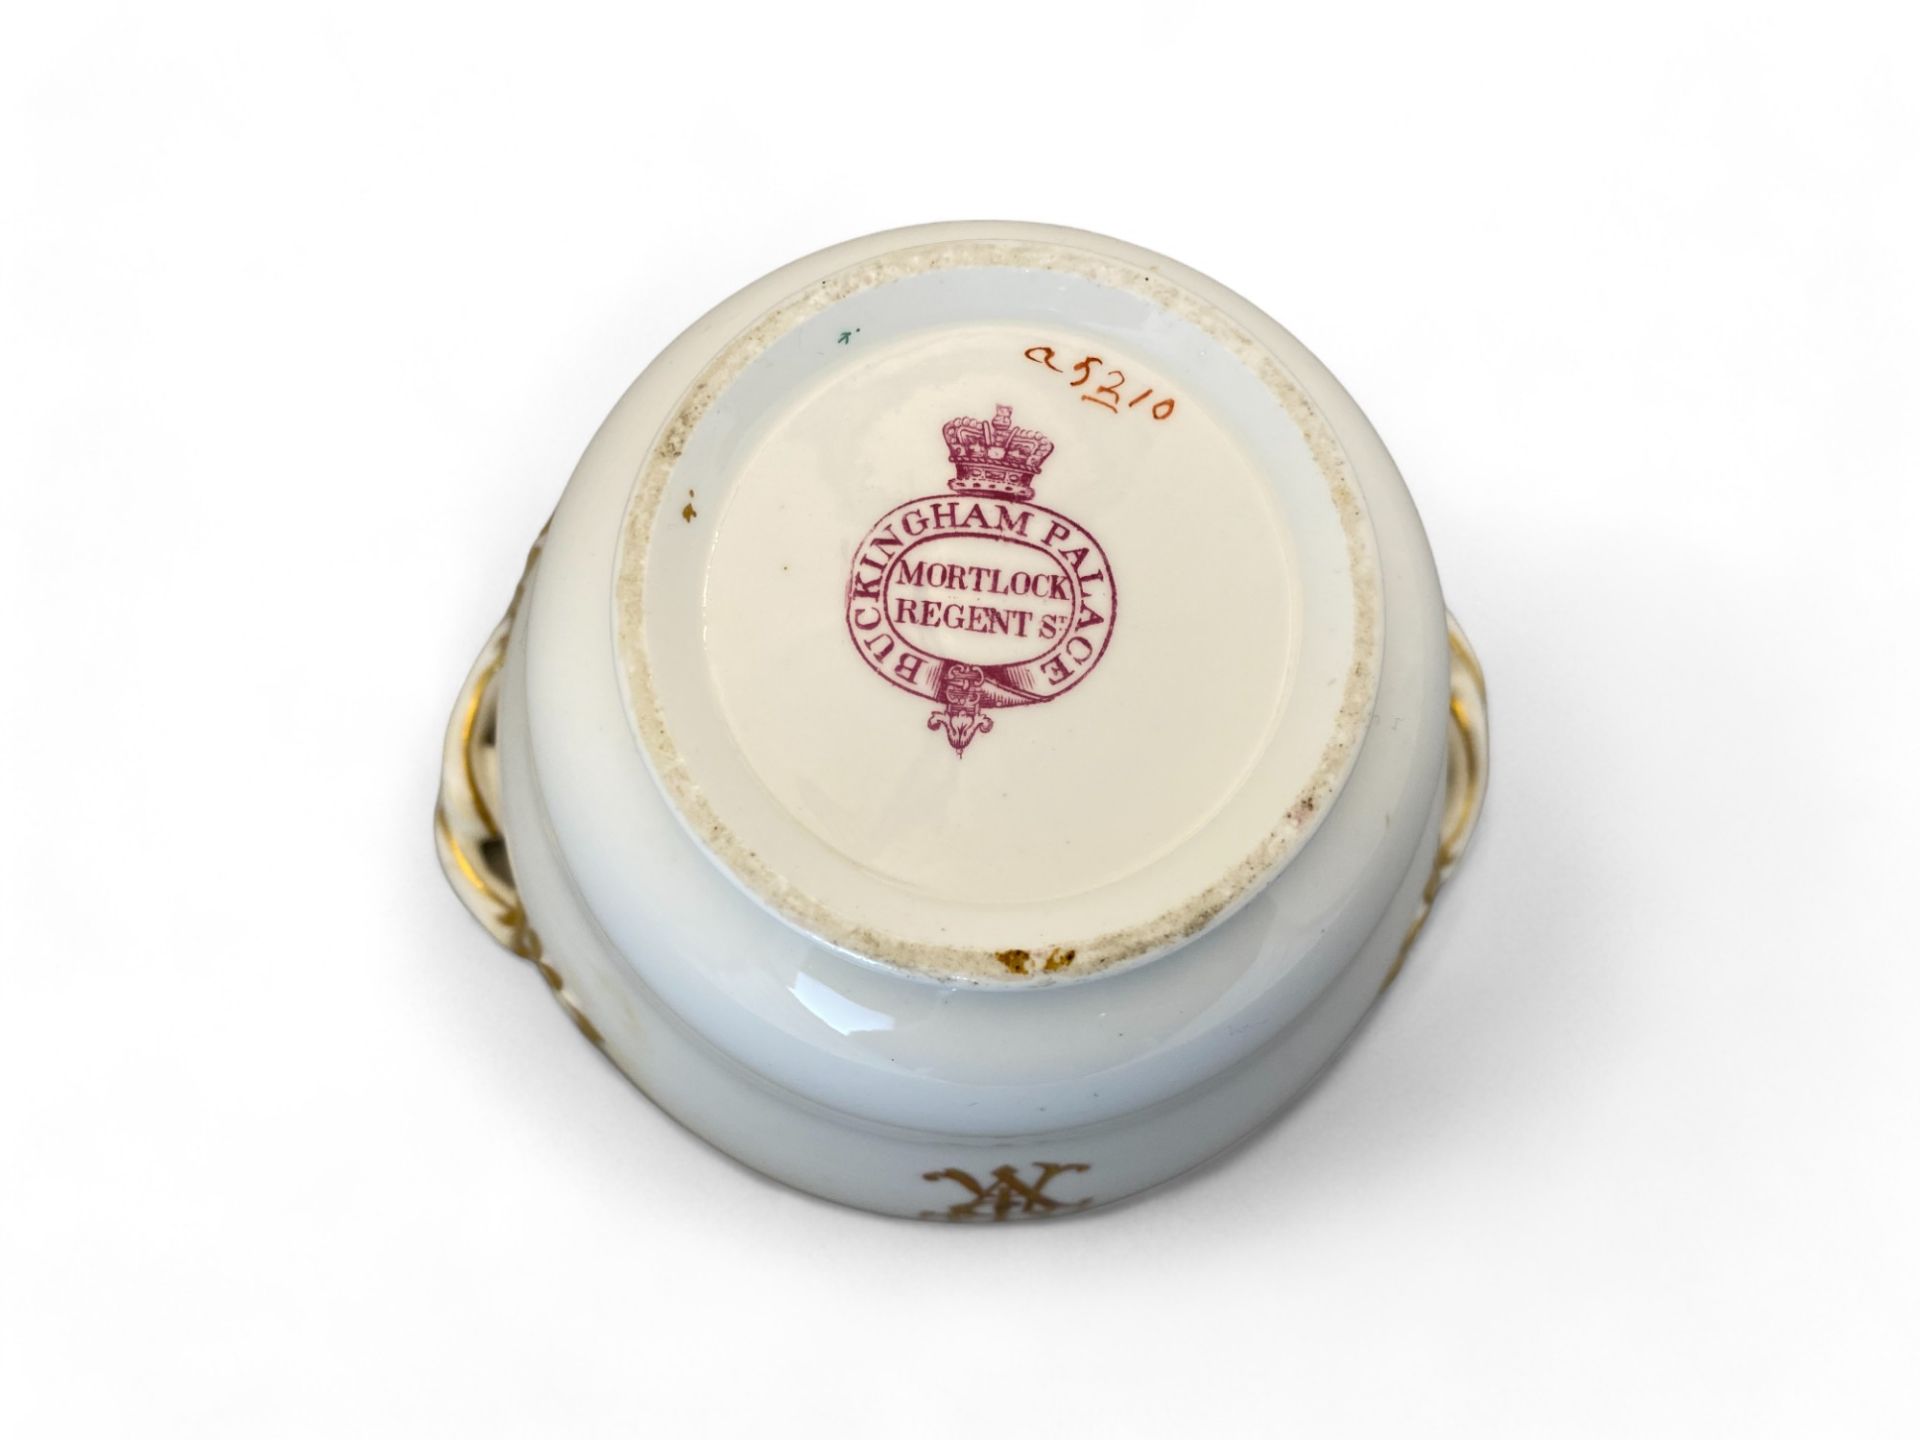 Of Royal Interest: A Mortlock China of Regent St white porcelain and gilt sugar bowl made for Queen - Image 7 of 7